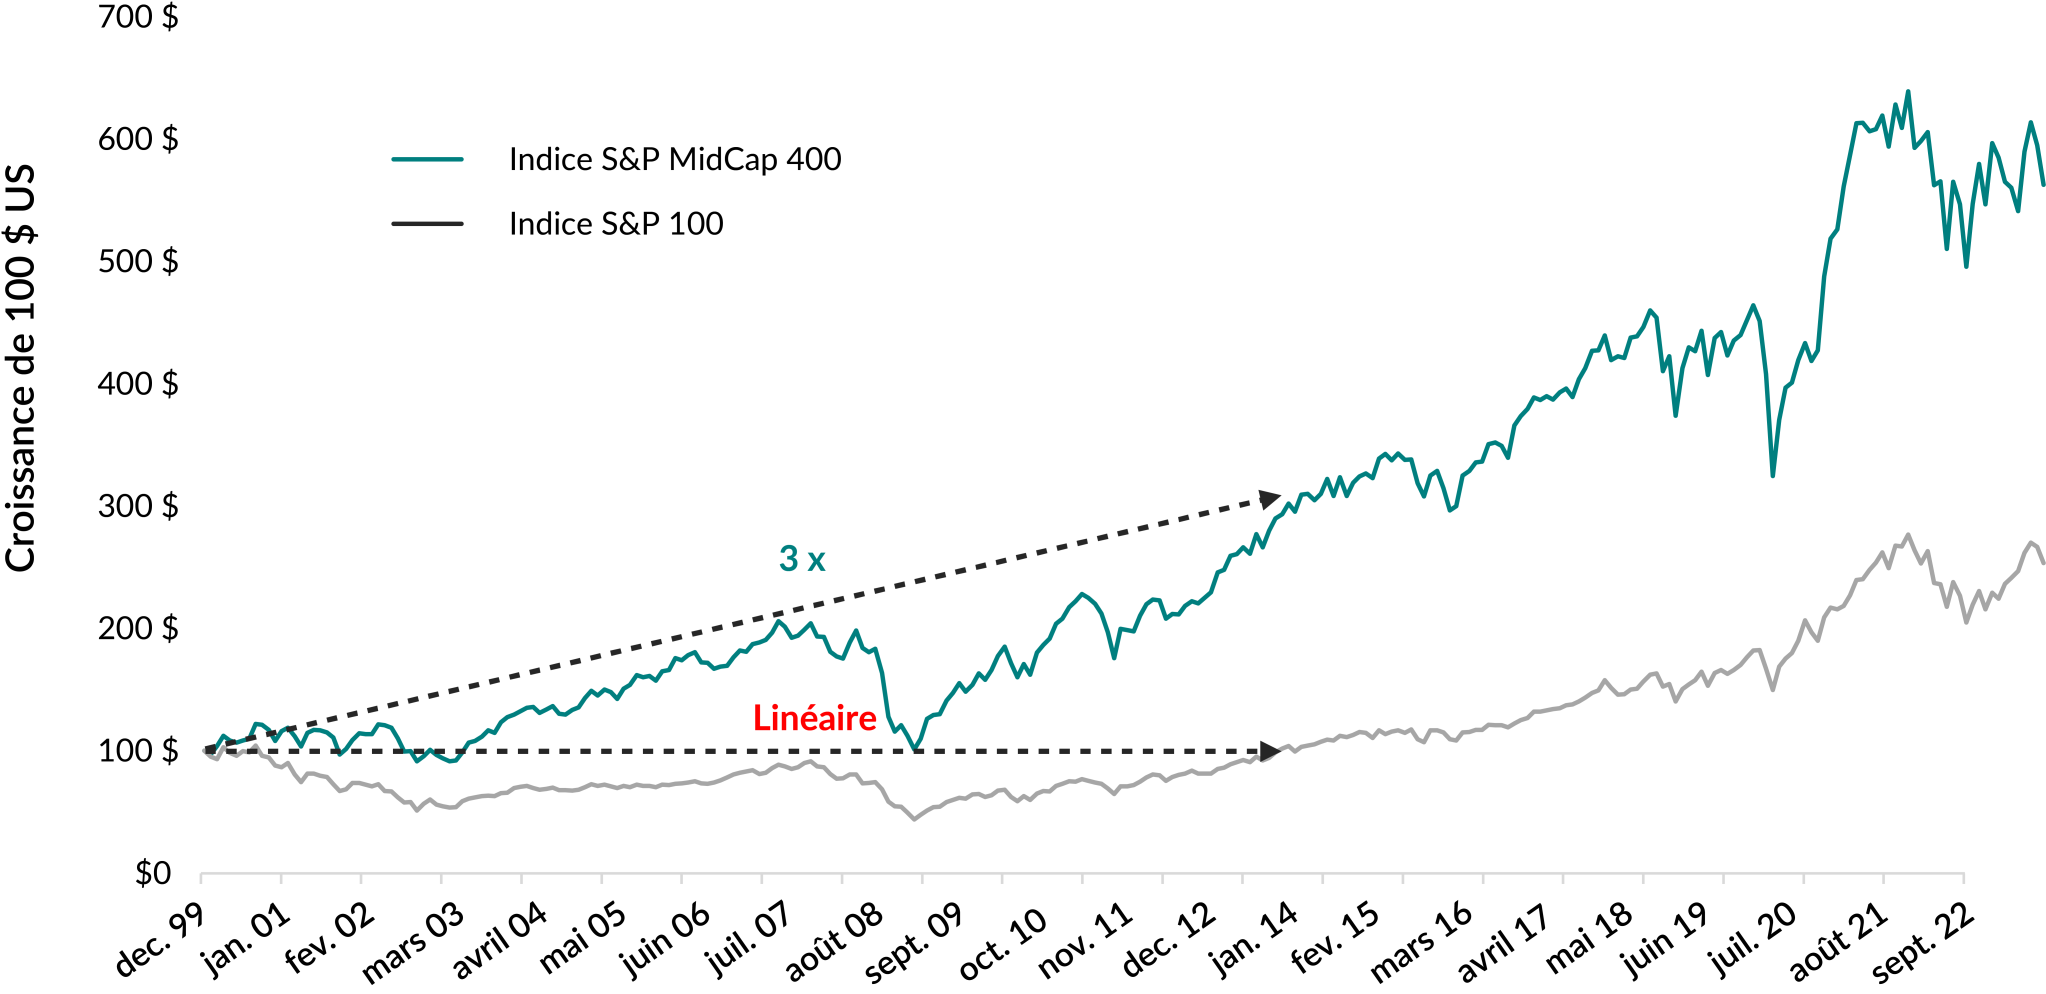 Historically mid-caps trade at similar or higher valuations than large caps because they’re smaller sized and have a longer growth runway. So, what happened to those willing to look different the last time conditions are like today? For the first 13 years after the end of the dot-com boom in 2000, the large-cap index was flat while mid-caps more than tripled. That outperformance has continued over the next decade to today.